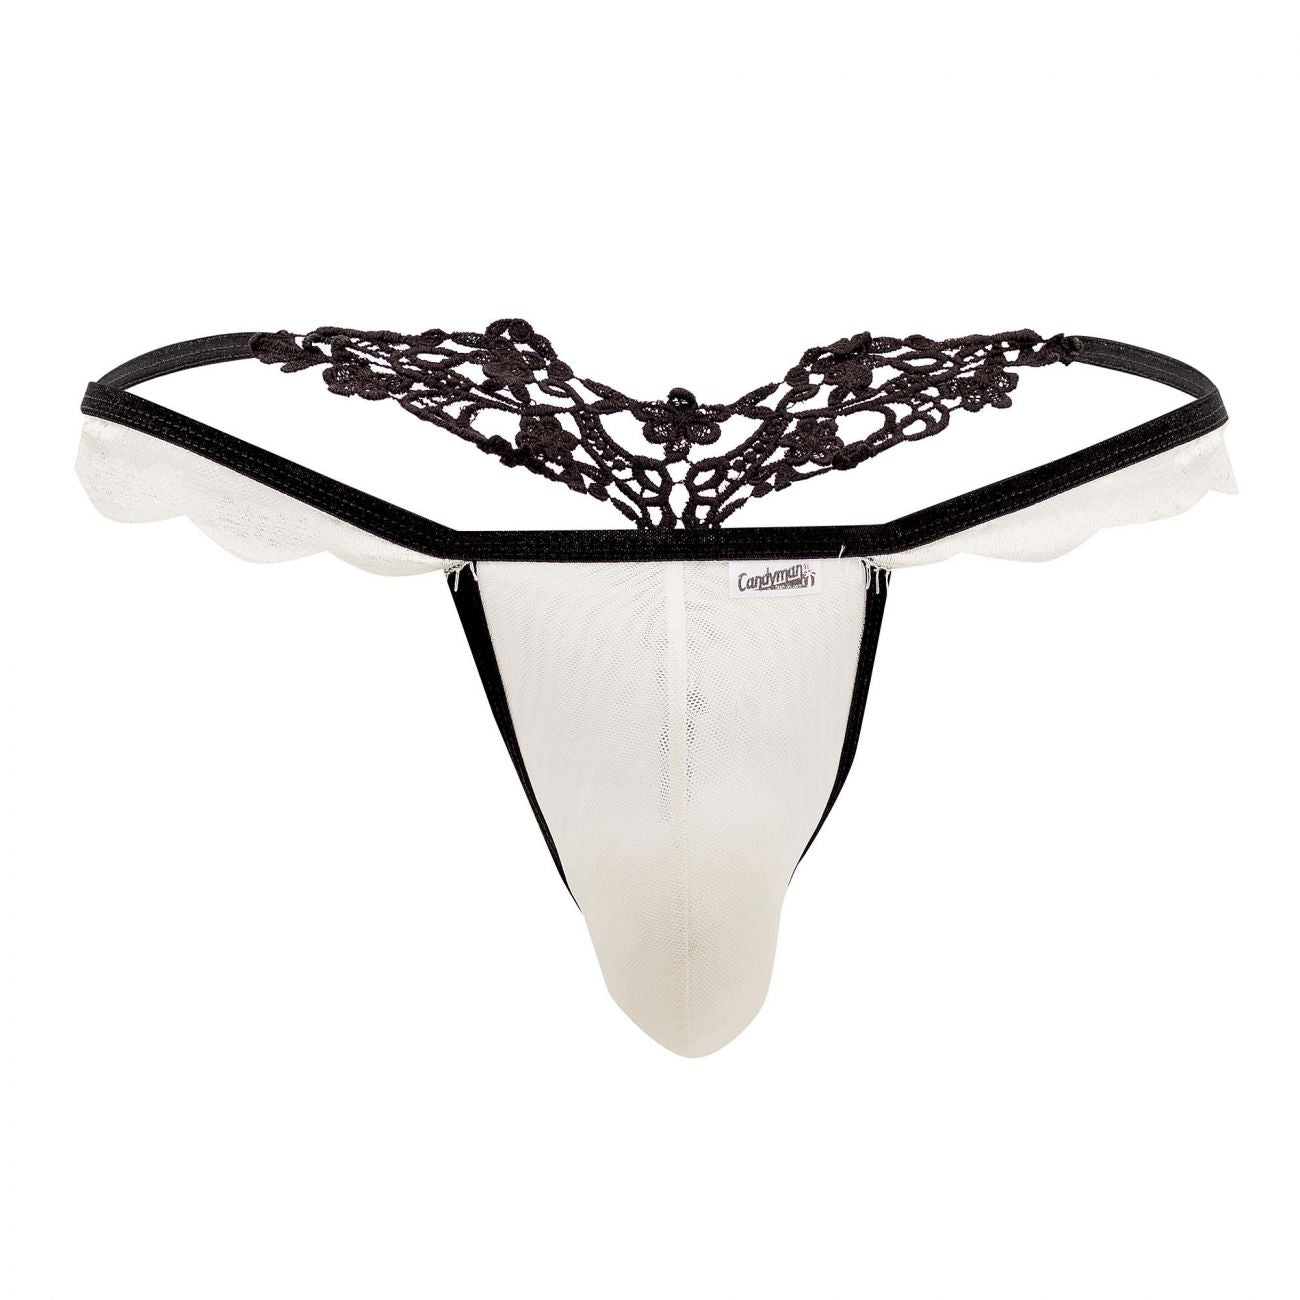 CandyMan 99563 Mesh-Lace G-String Ivory and Black